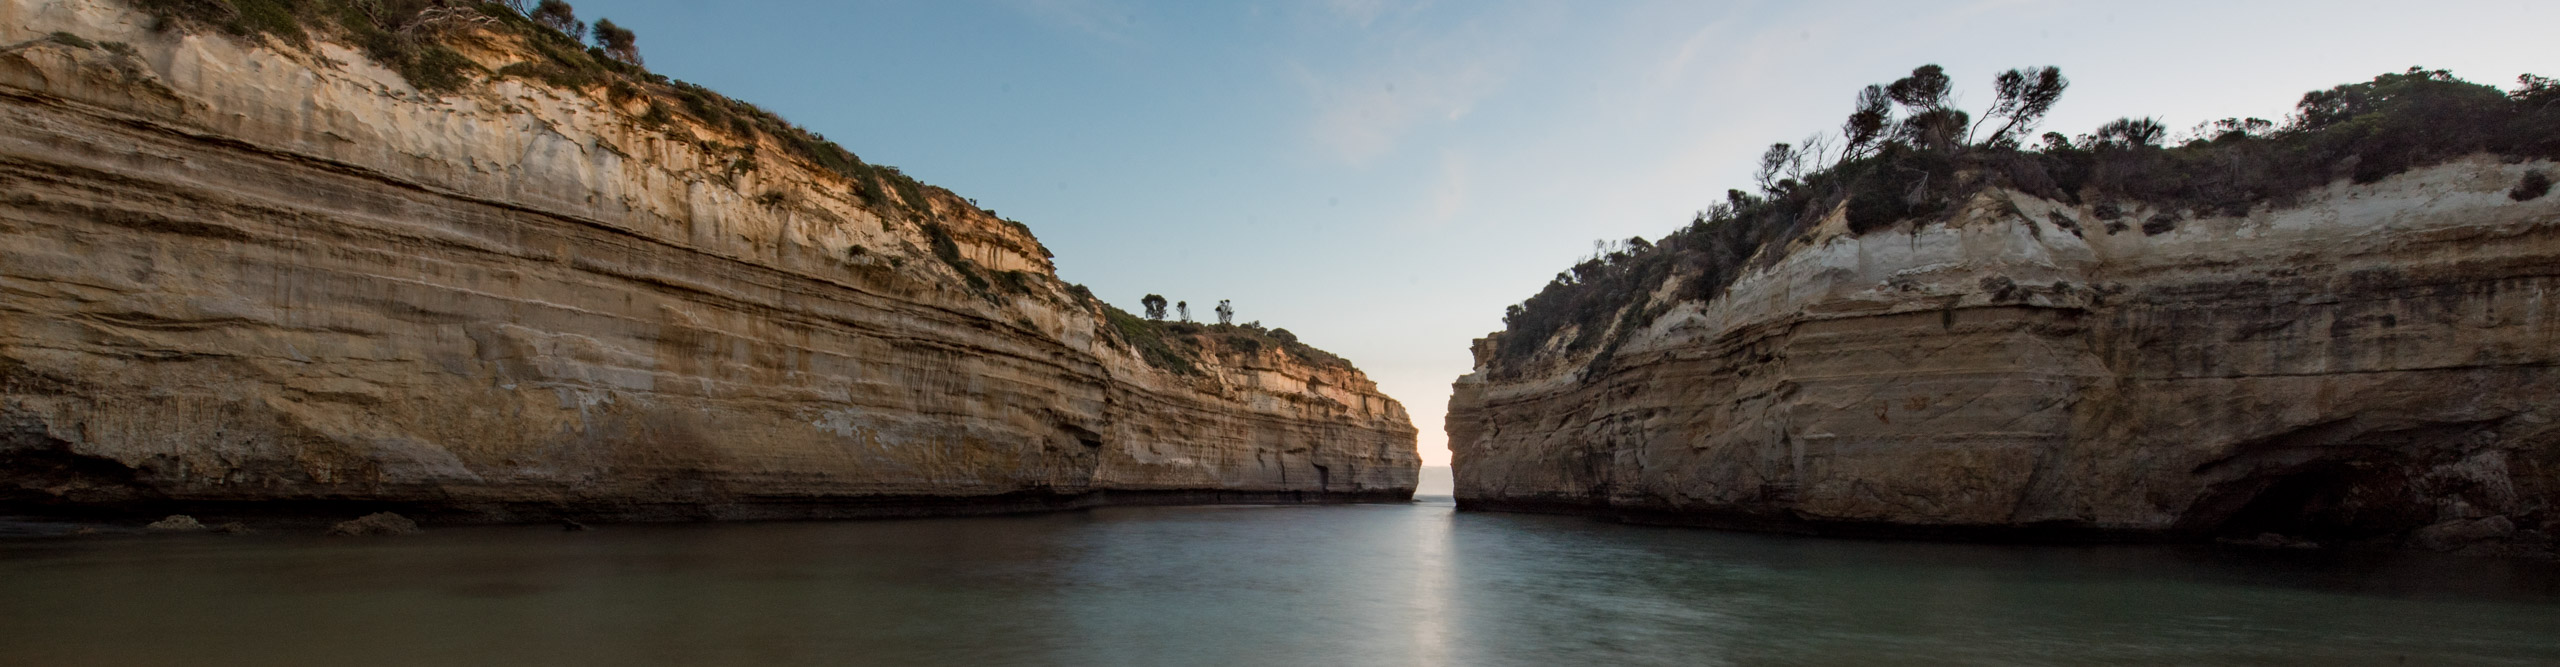 Long exposure of Loch Ard Gorge at sunset, along the Great Ocean Road